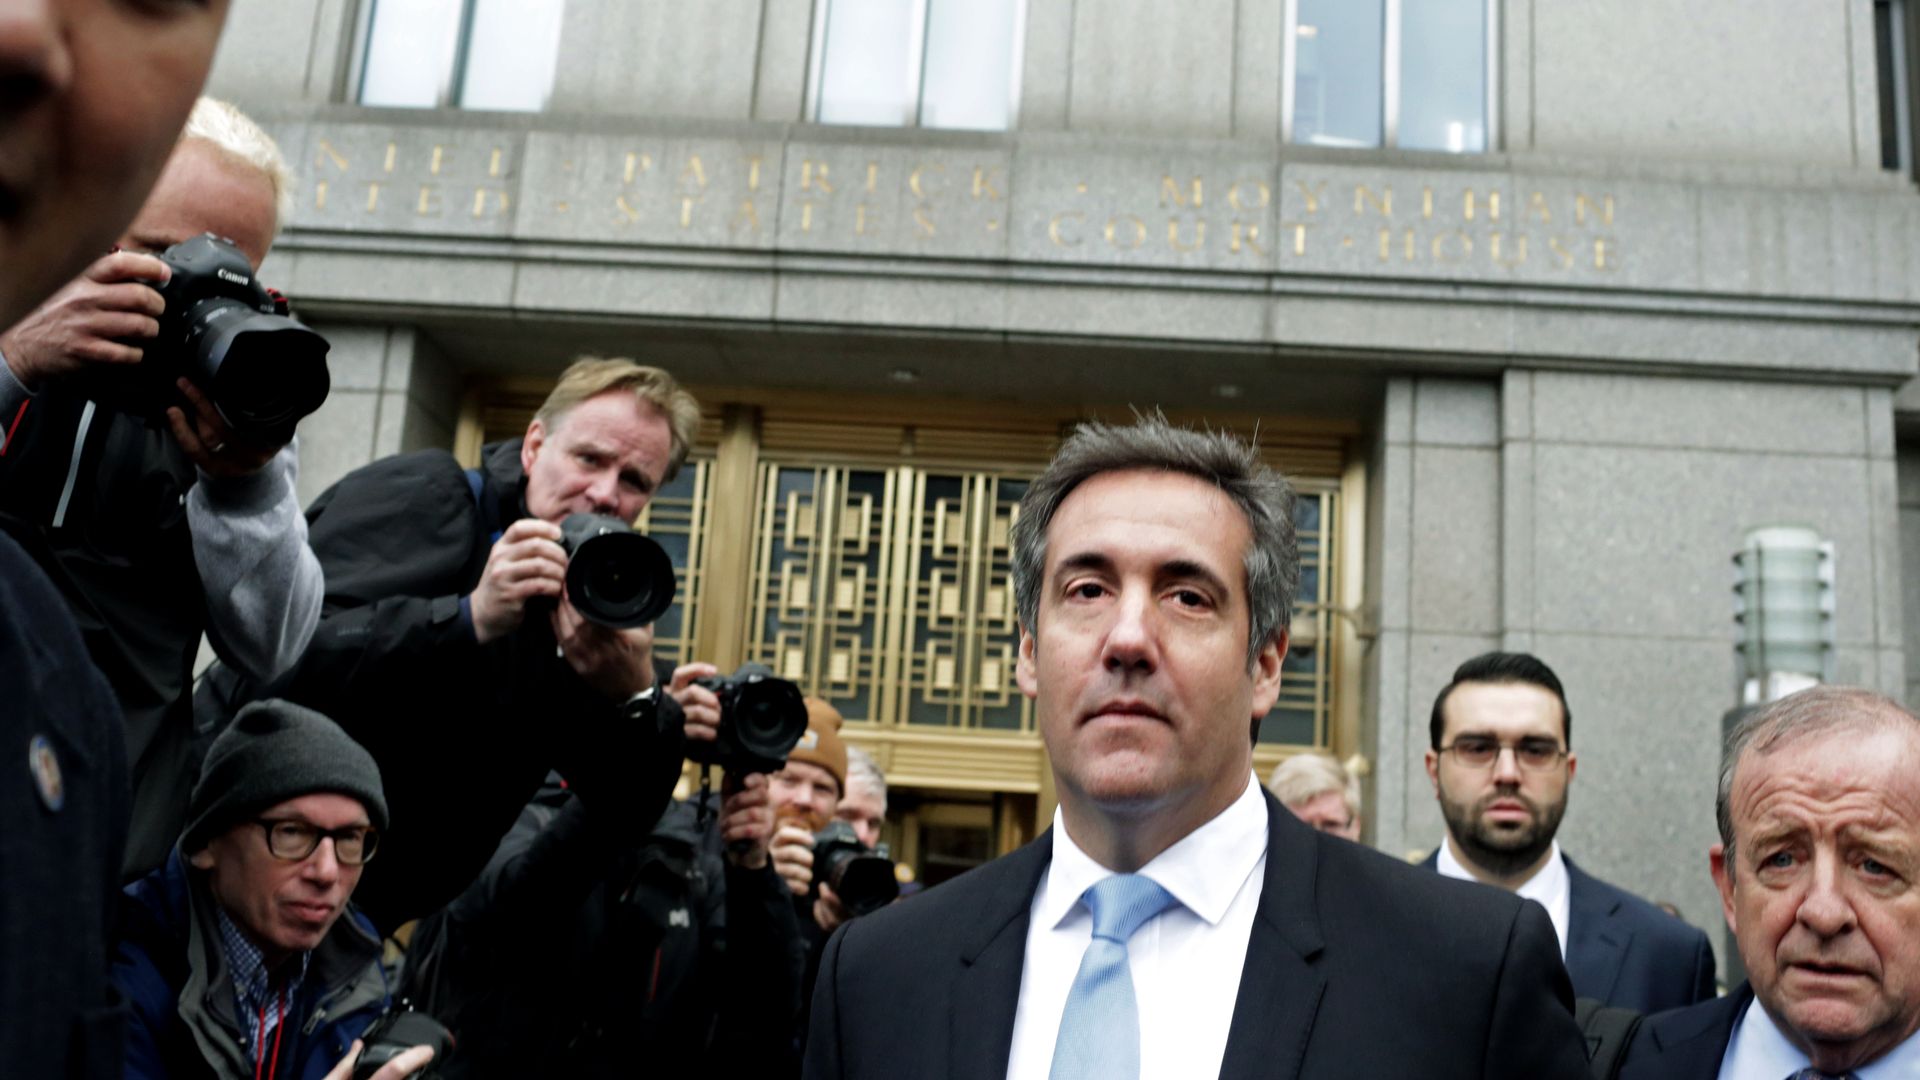 Michael Cohen in a crowd of photographers